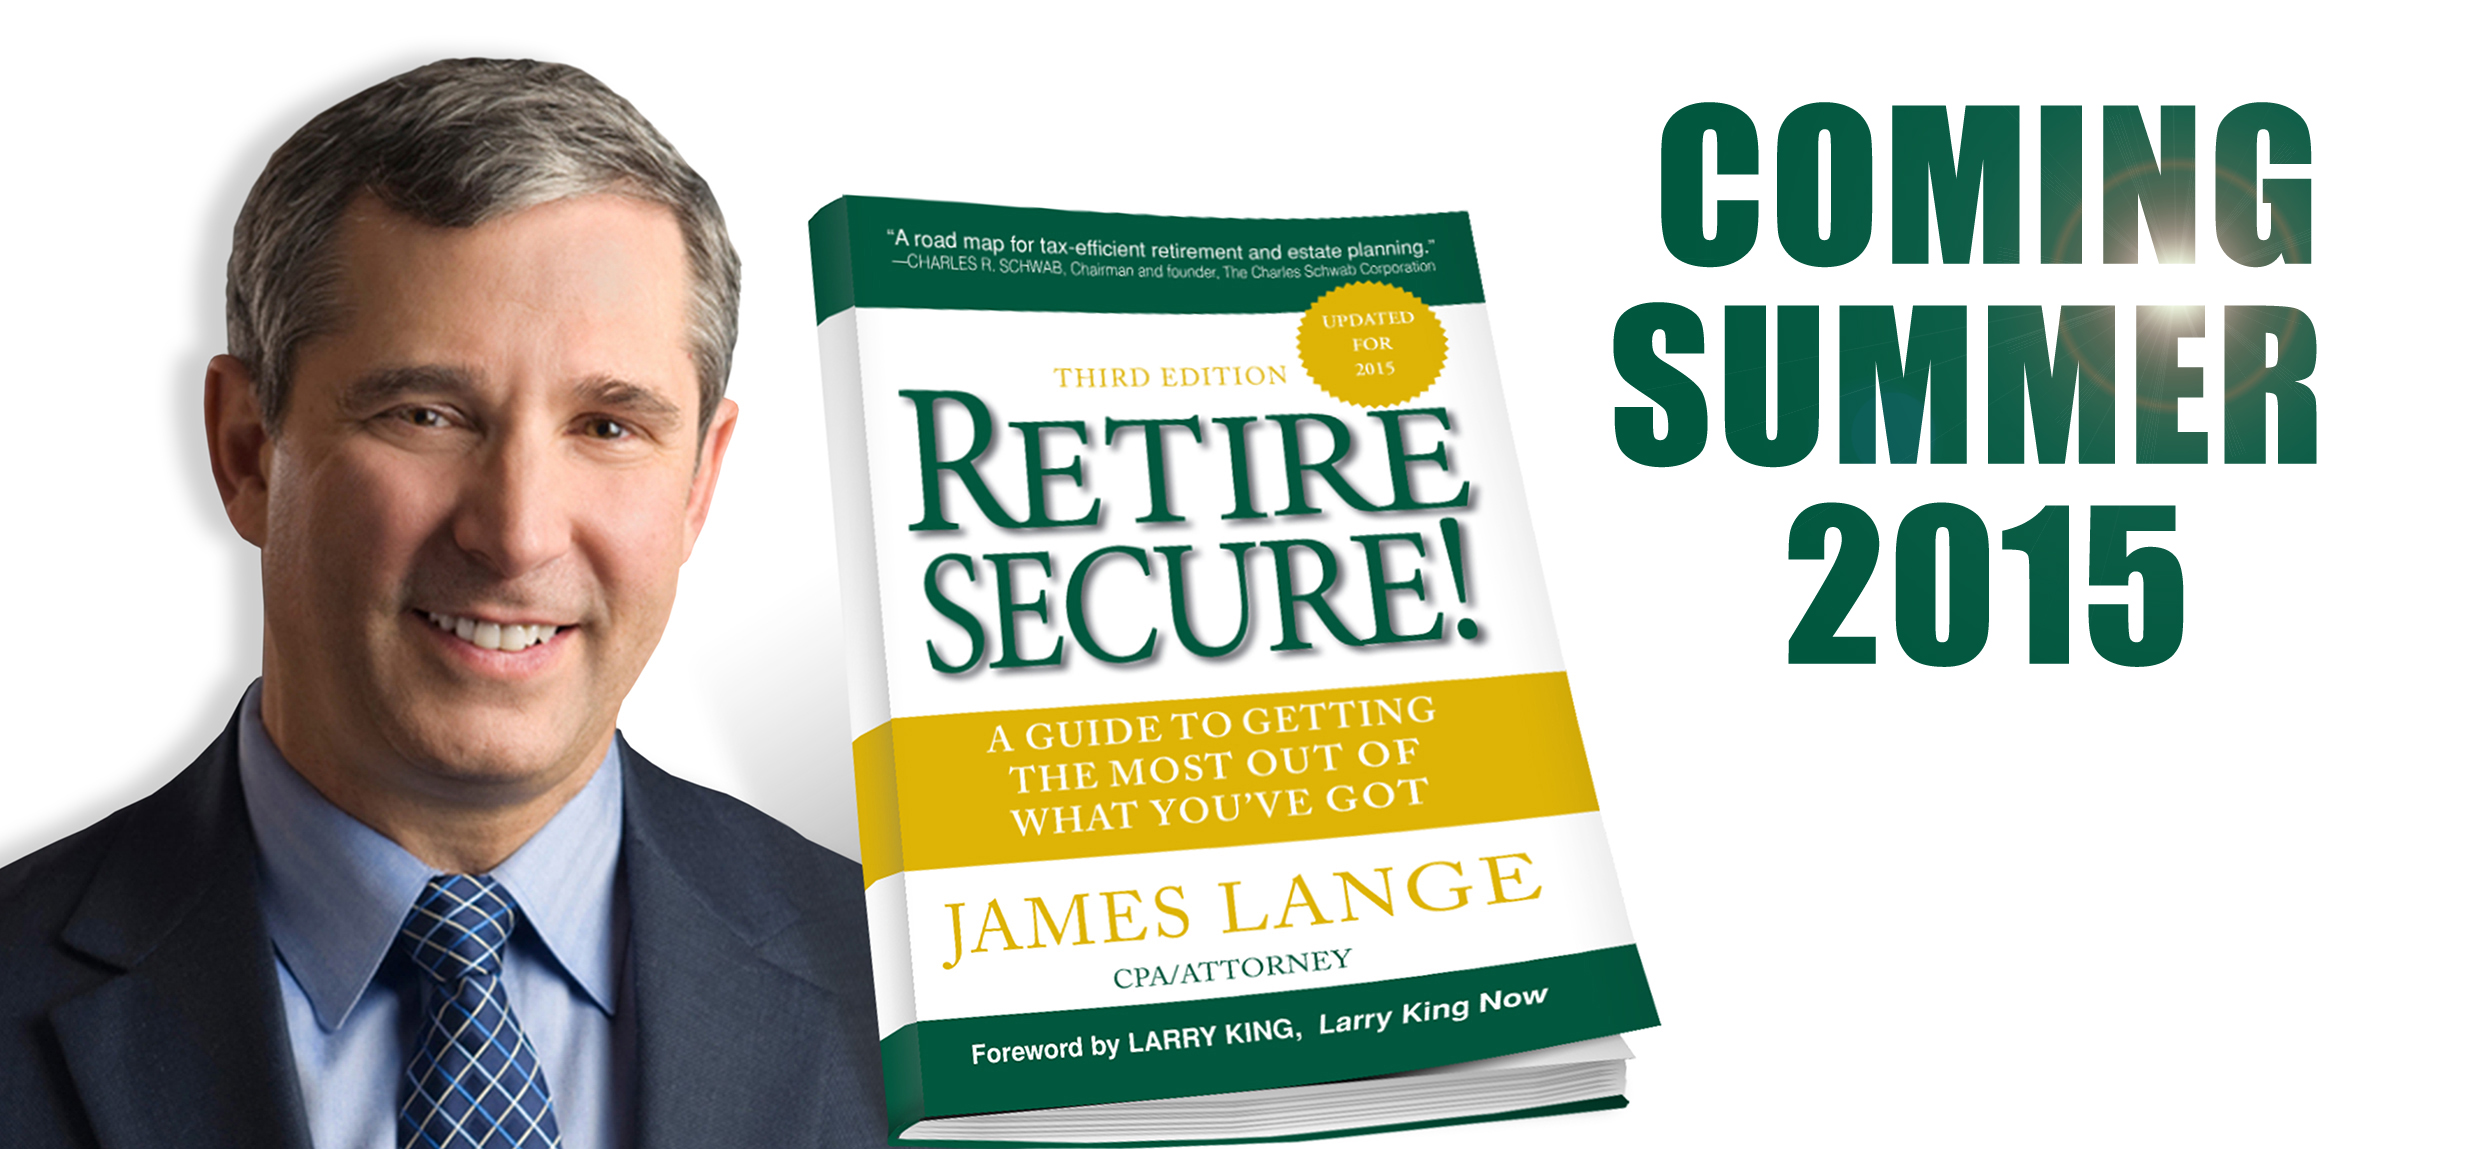 Retire Secure A Guide to Getting the Most Out of What You've Got, James Lange 2015